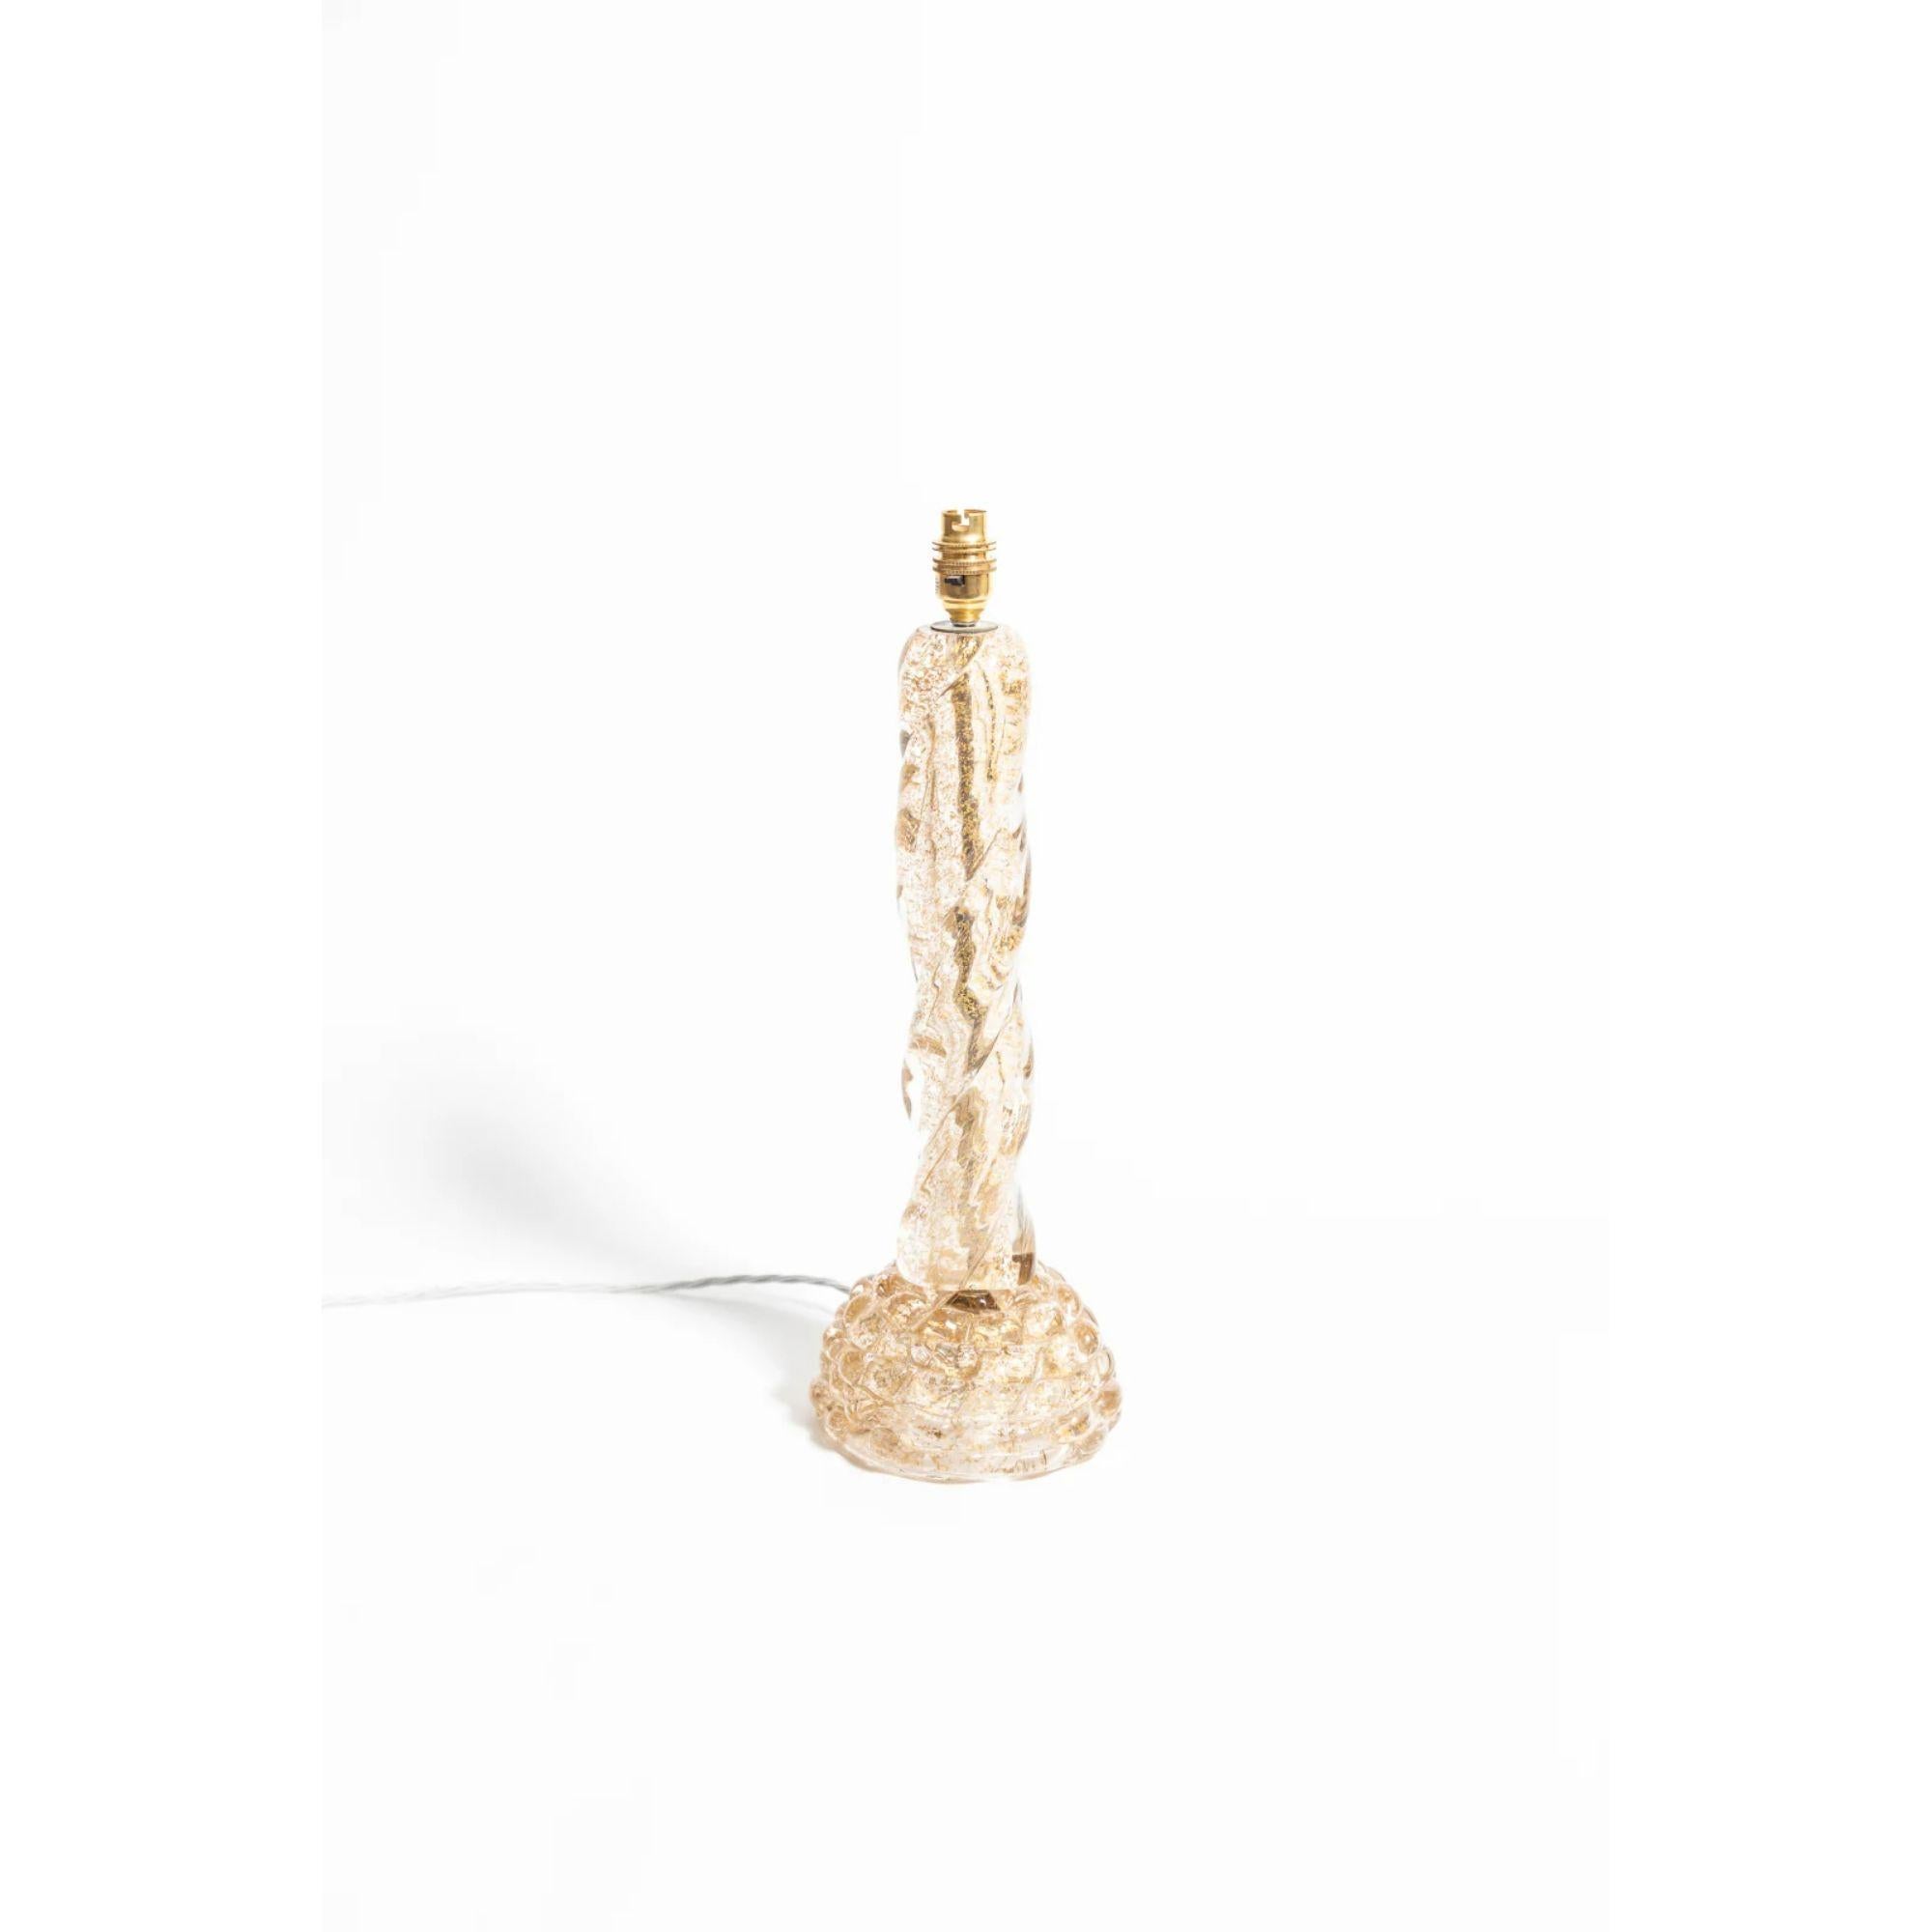 A sculptural table lamp in Murano glass and gold leaf by Ercole Barovier, 1940s.

Ercole Barovier began his personal aesthetic transition toward modernism in the 1930s with his Primavera series of vases - idiosyncratic milky-white and clear glass